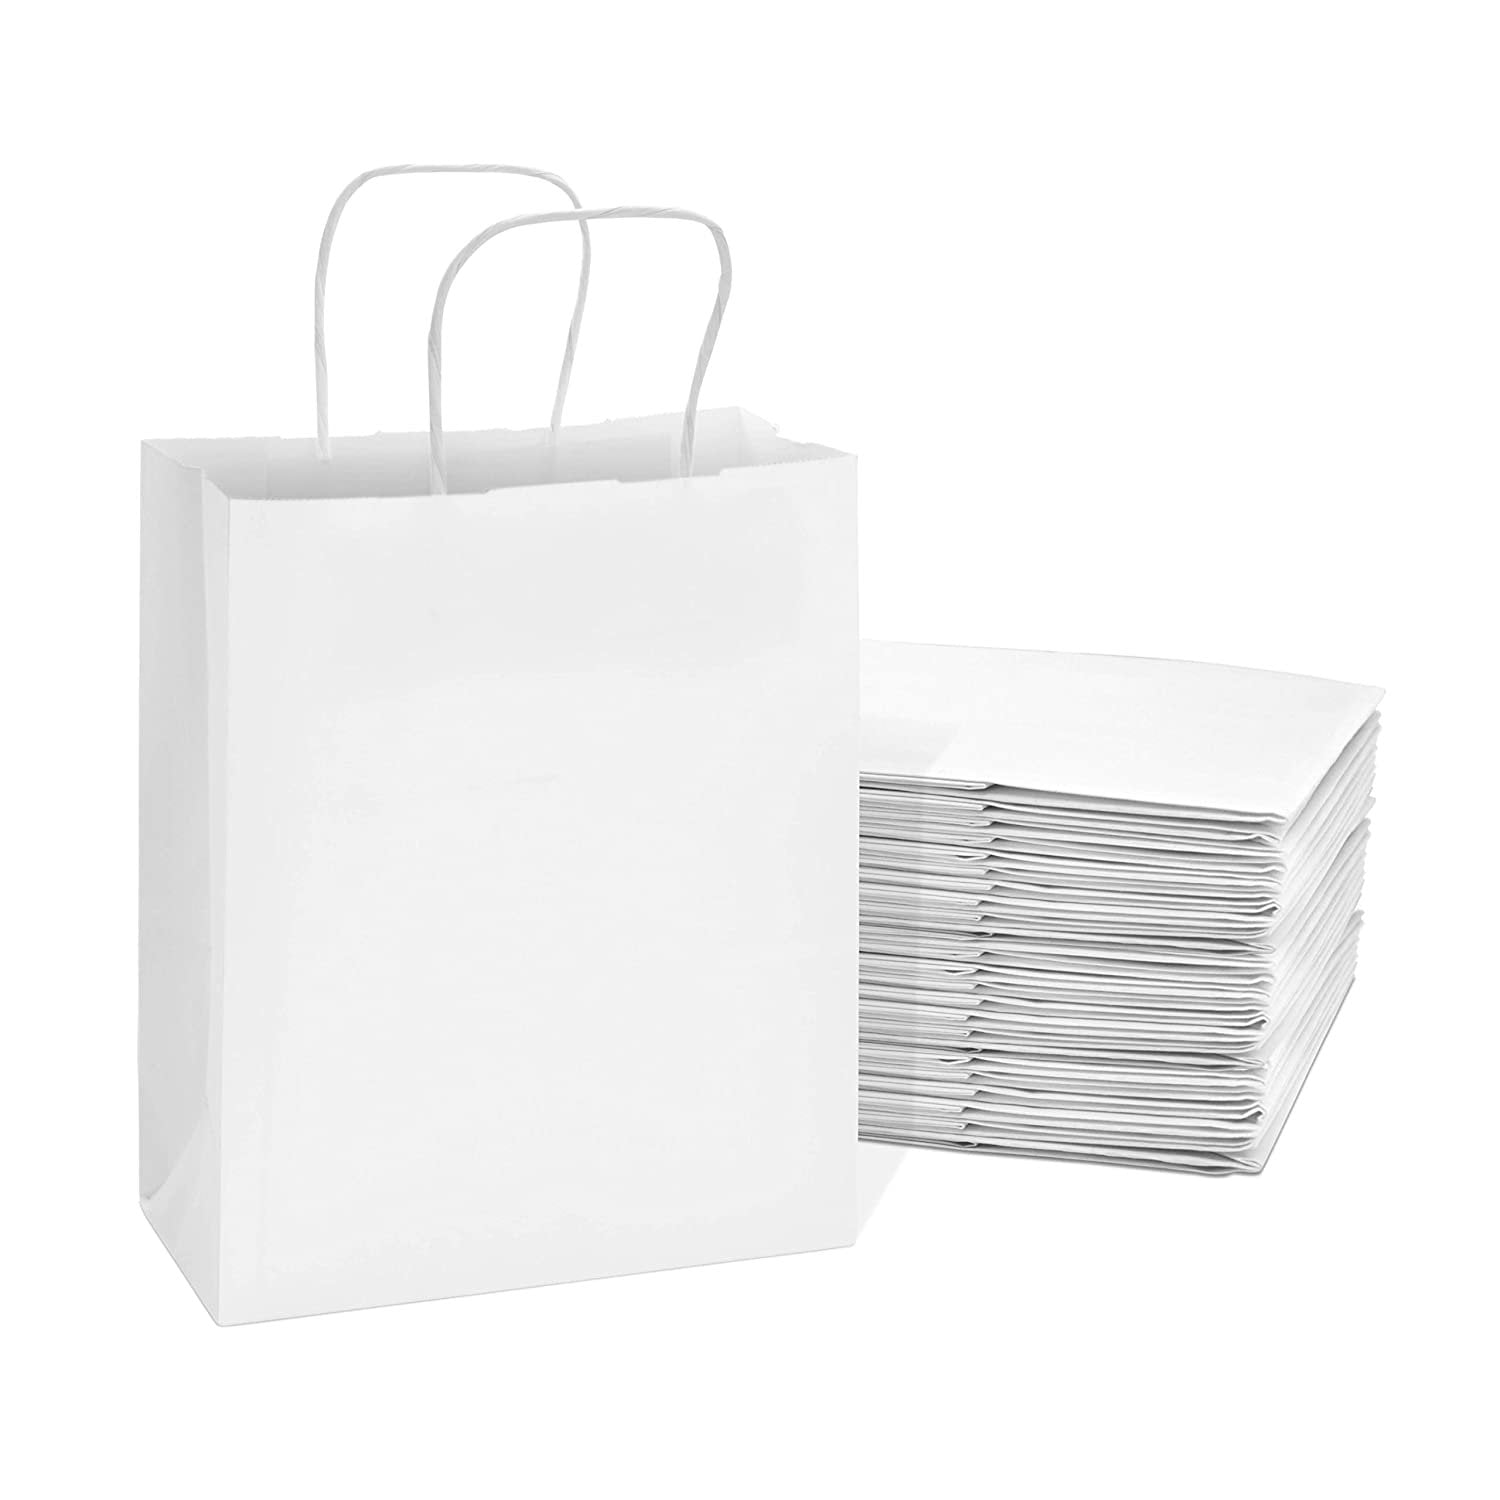 24 Party Paper Carrier Bags with Twisted Paper Handles Size 20 x 18 x 8 